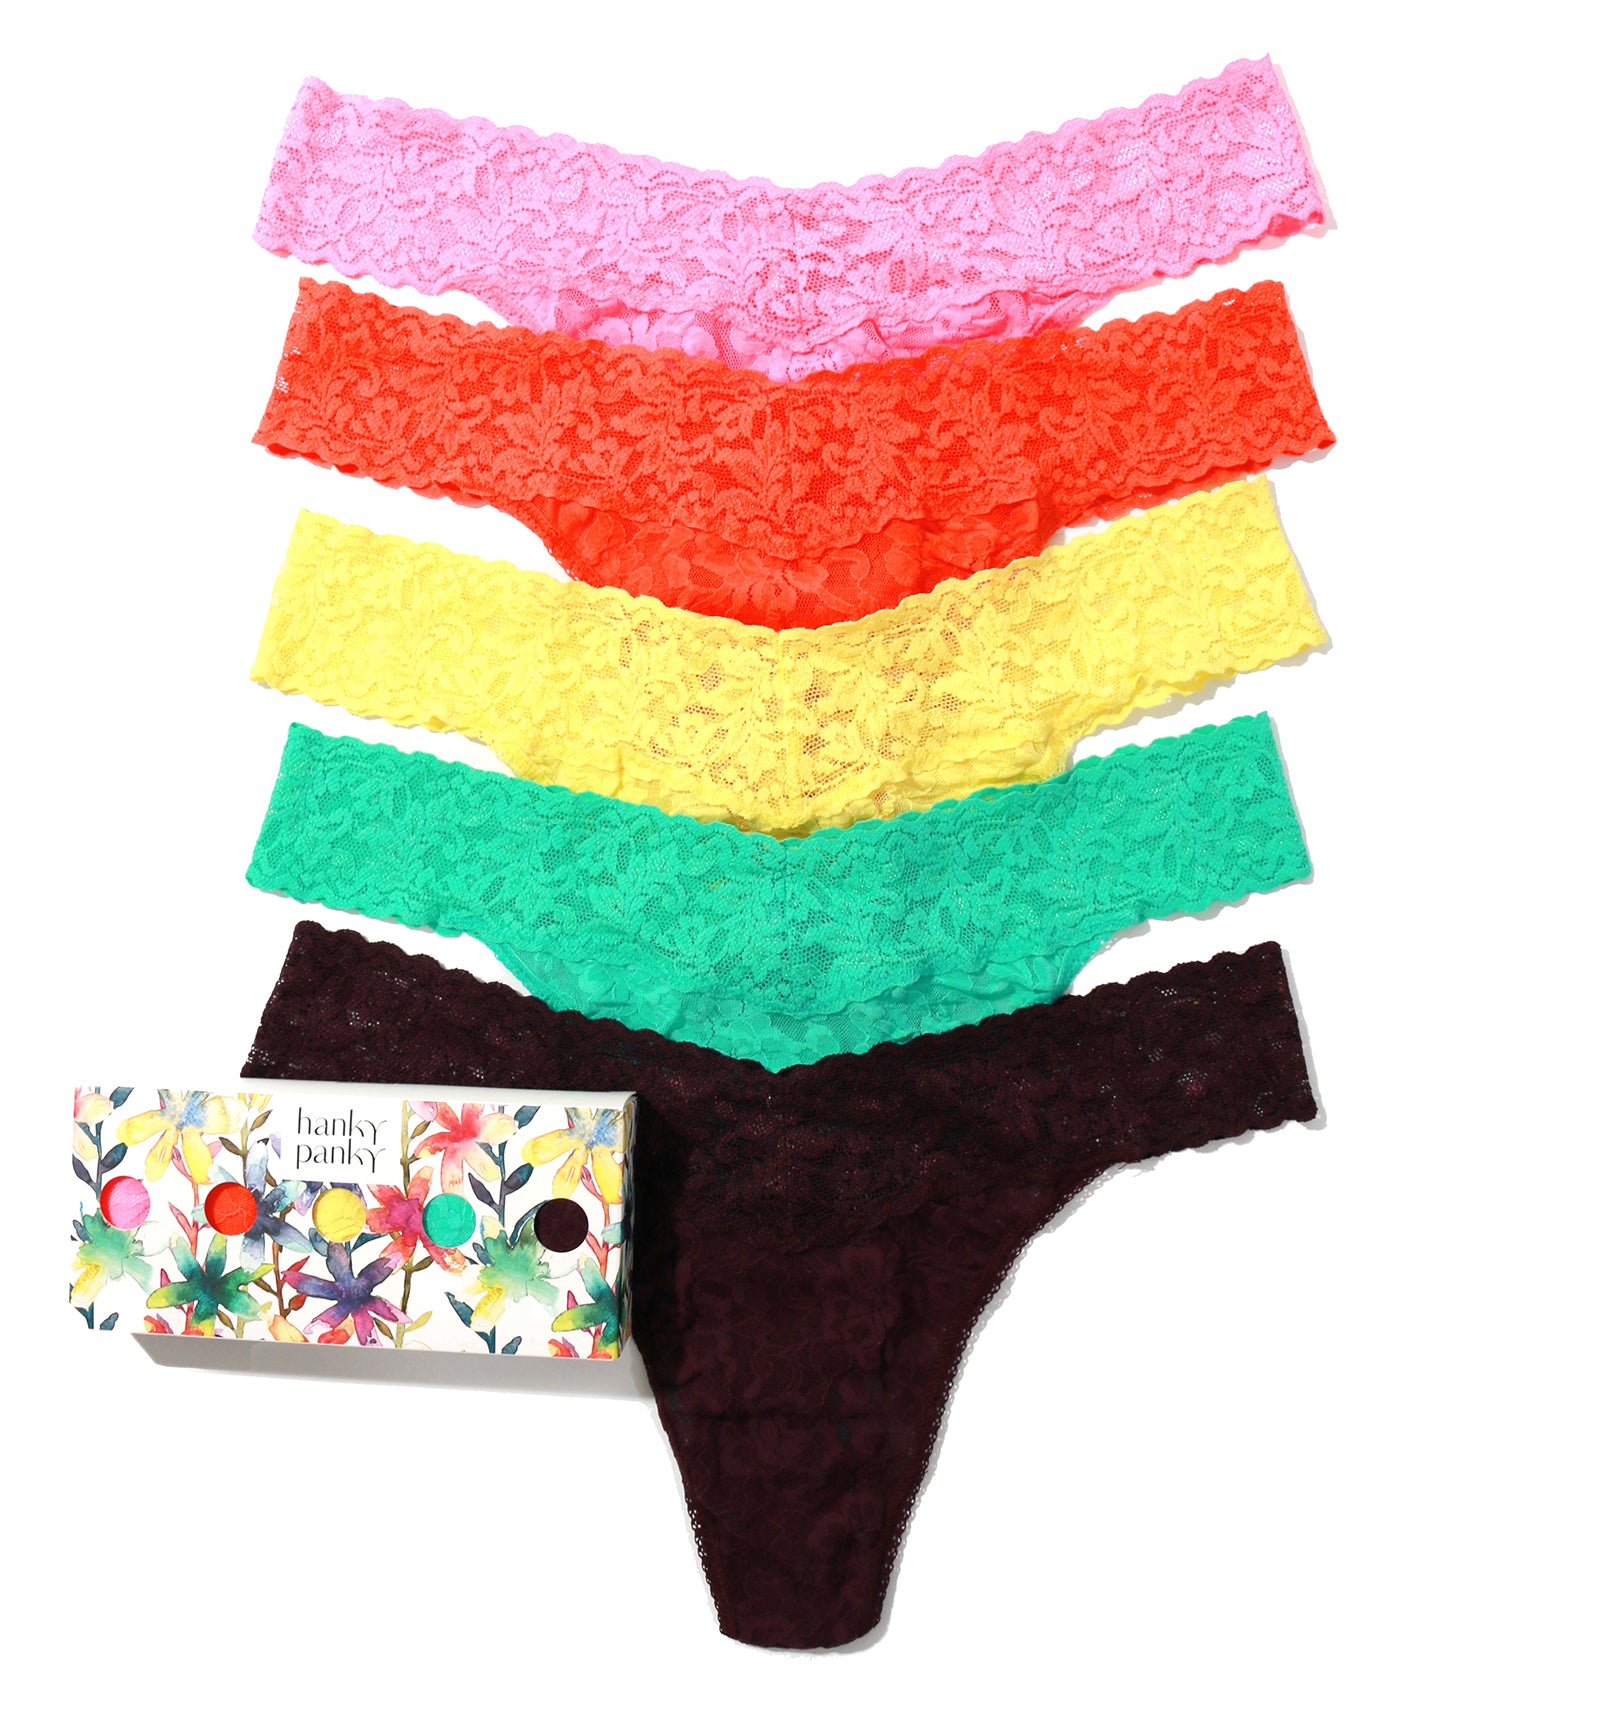 Hanky Panky 5-PACK Signature Lace Original Rise Thong (48115PK),Still Blooming - Pink/Orange Sparkle/Limoncello/Agave Green/Plum,One Size